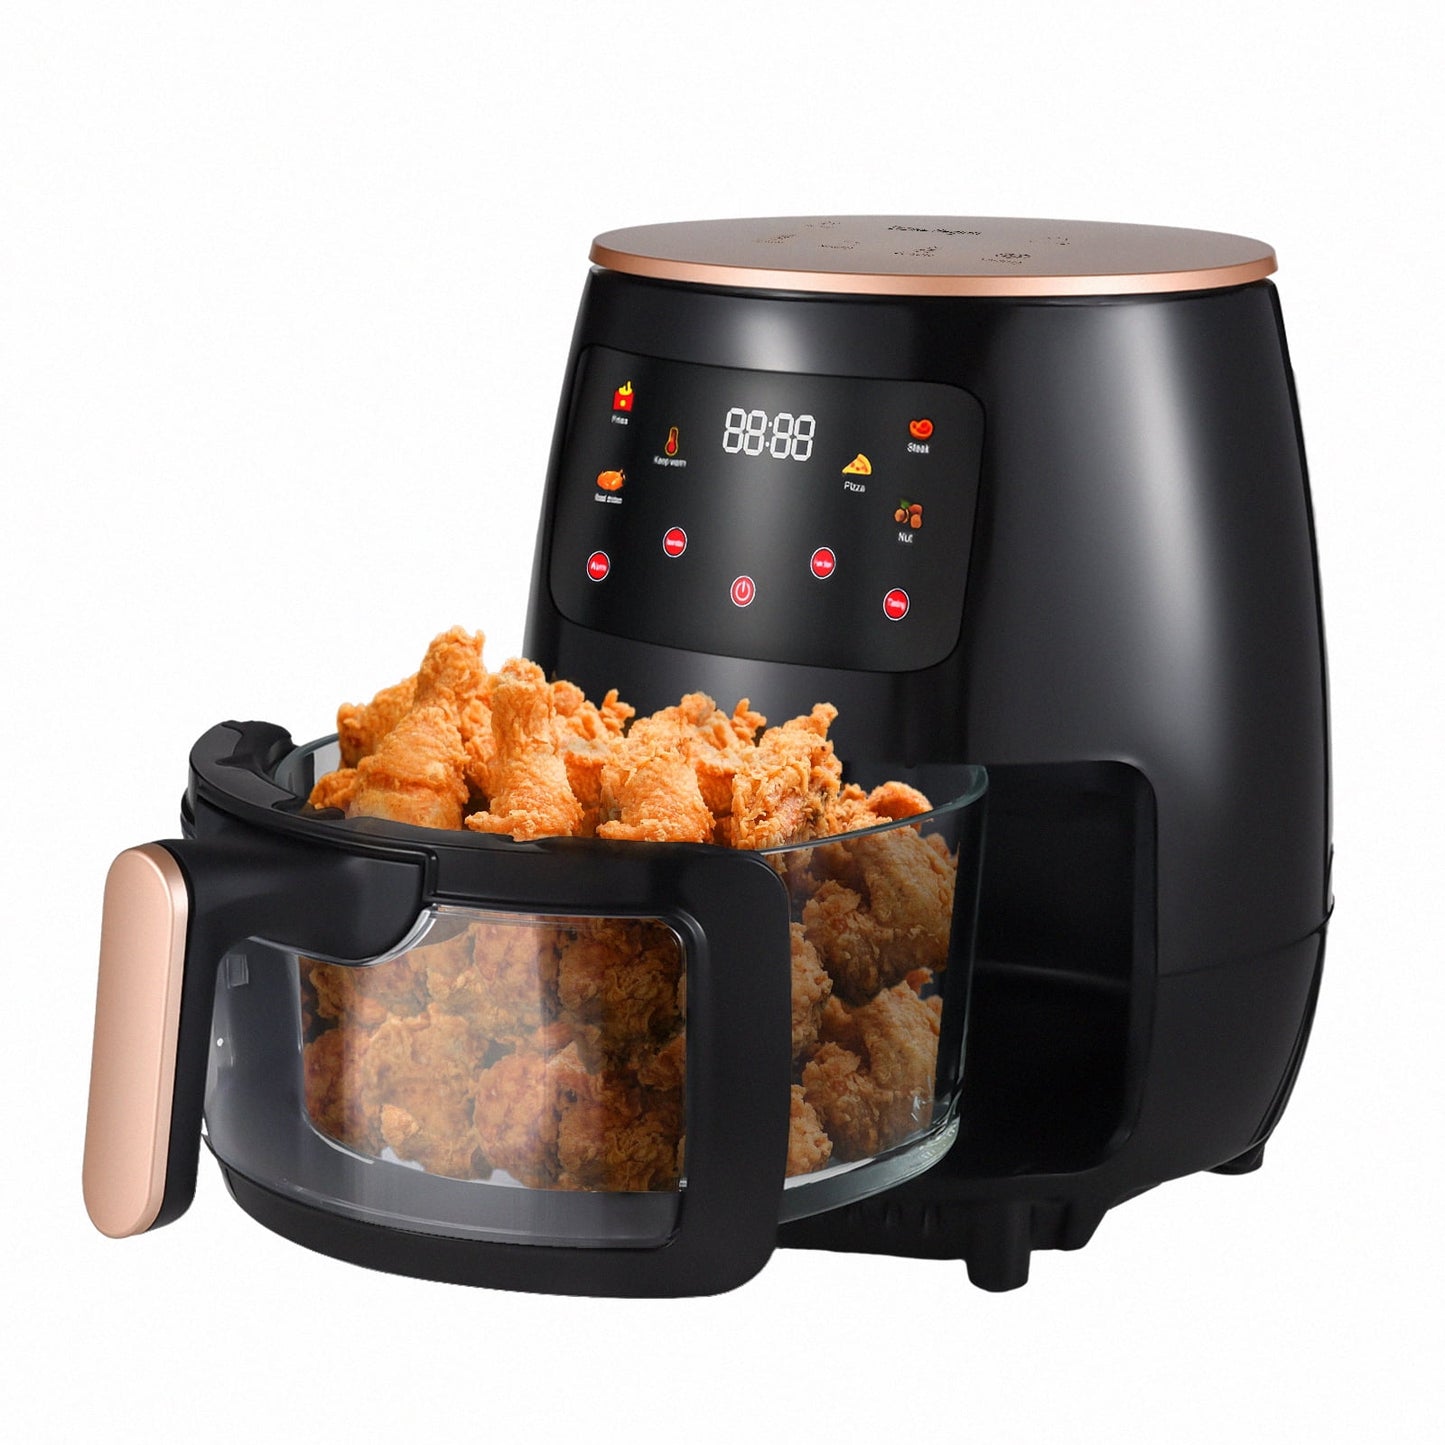 6QT Air Fryer with Visible Cooking Window, Electric Hot Oven with Digital LED Touchscreen, Glass Basket,2400W